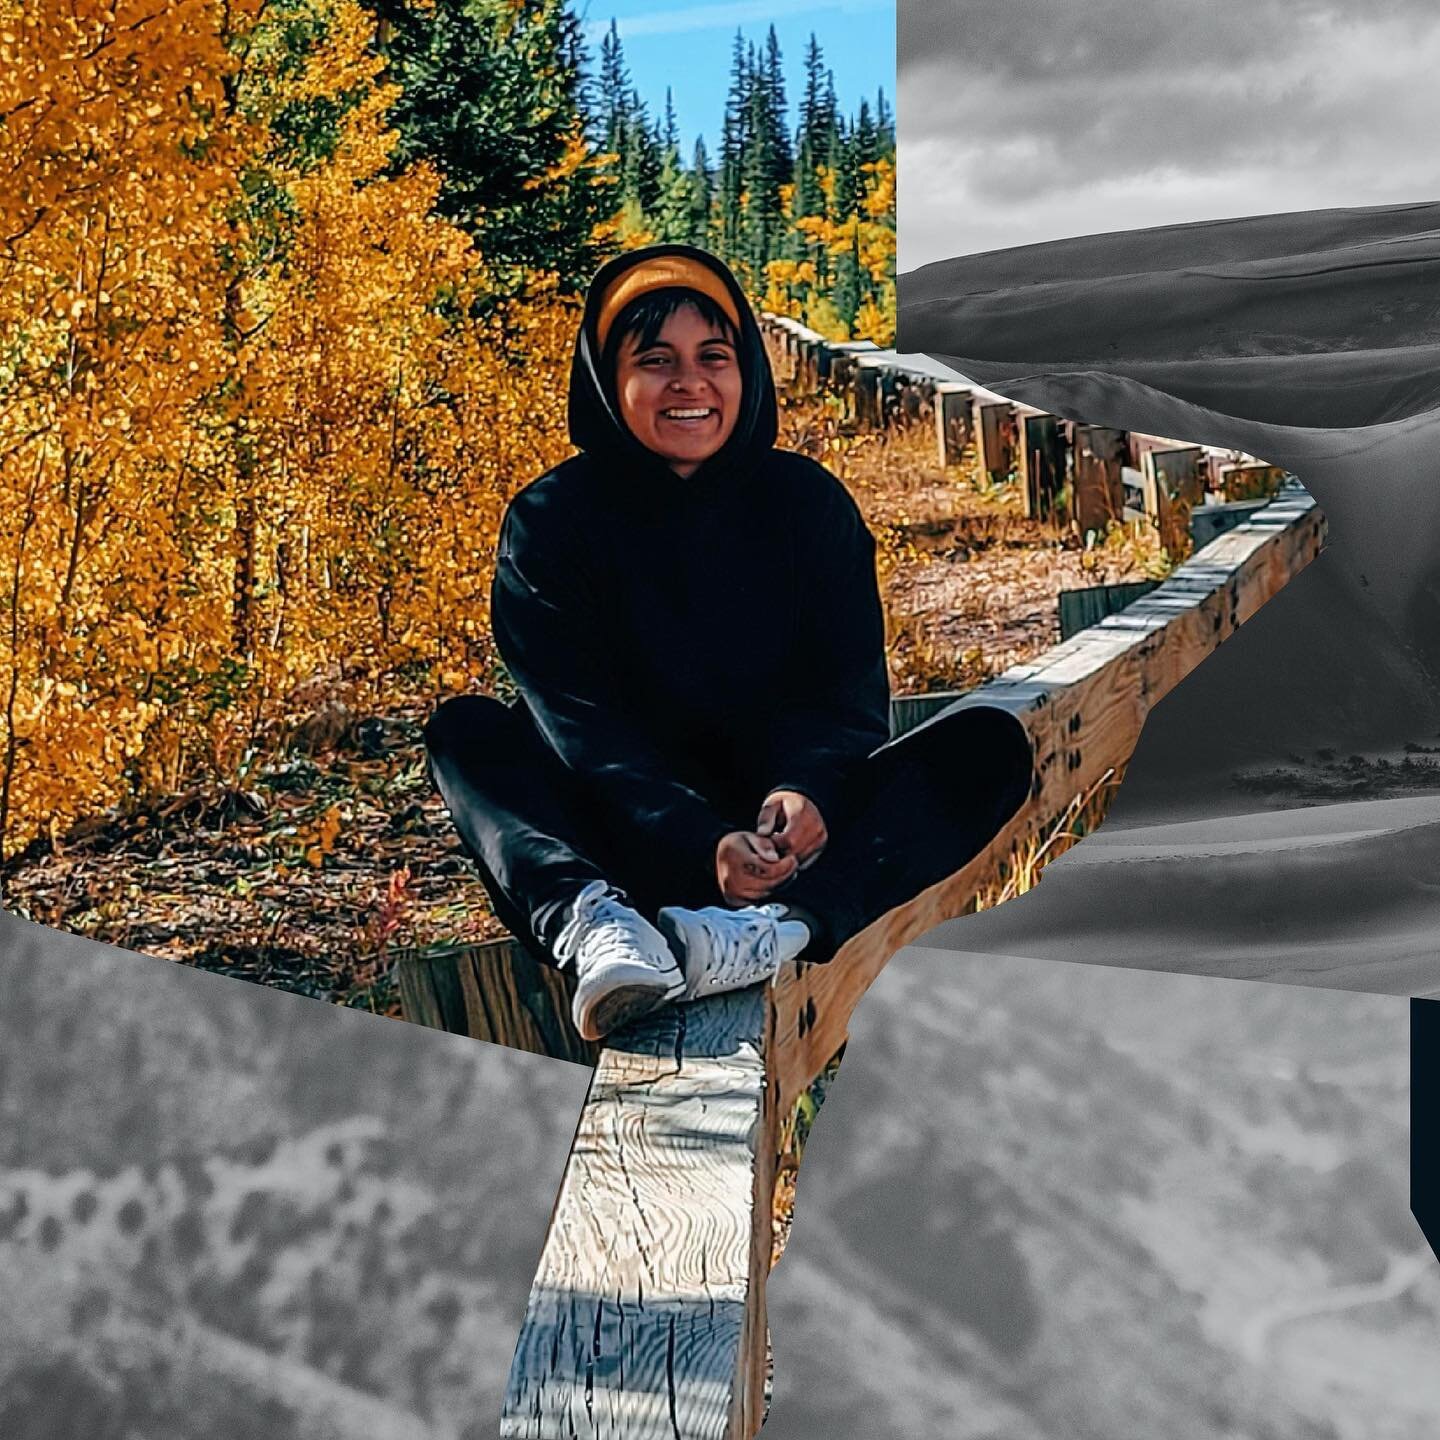 Photo dump ✨

[id: image slider of content gather in the past three months:
1. Close up collage of Alex sitting on a railing with yellow aspen trees behind them.
2. Selfie of Alex and Bridget with heir two dogs leaking through. 
3. Image of Bridget d